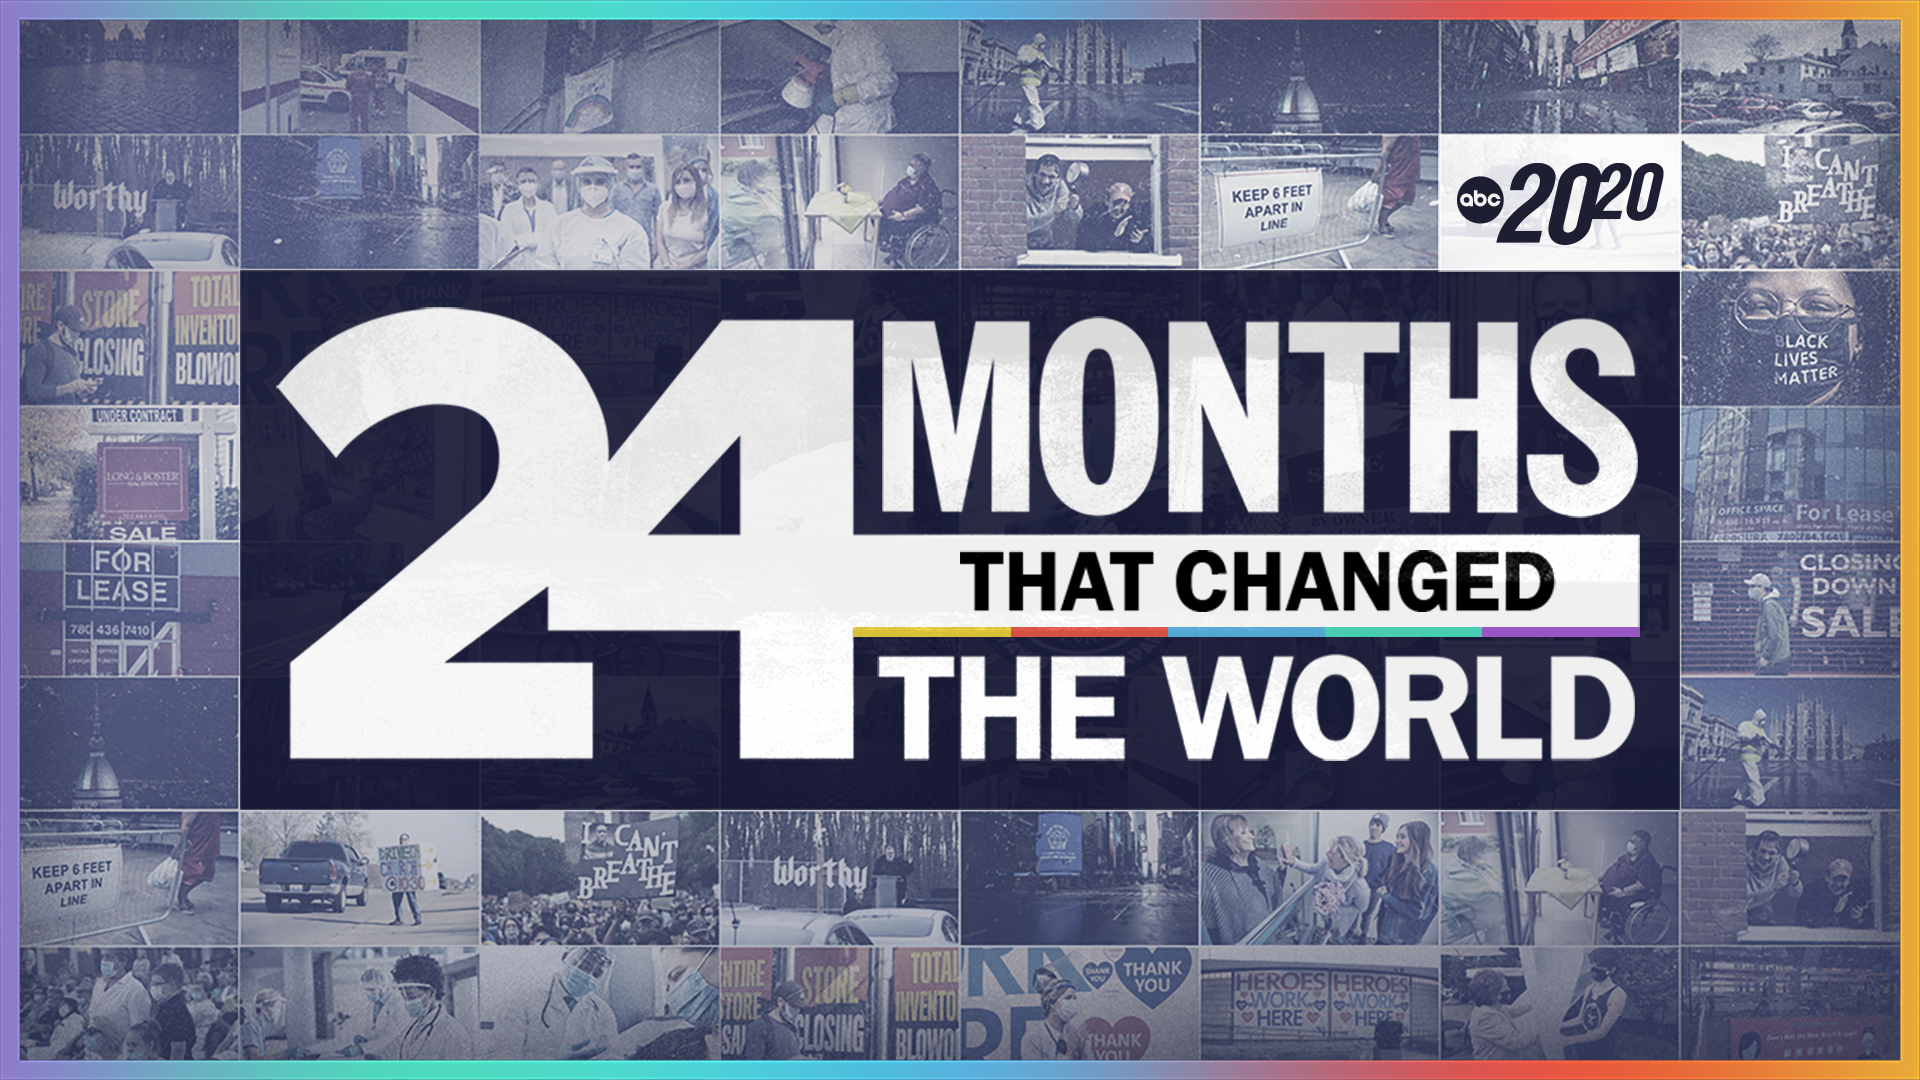 24 Months That Changed the World